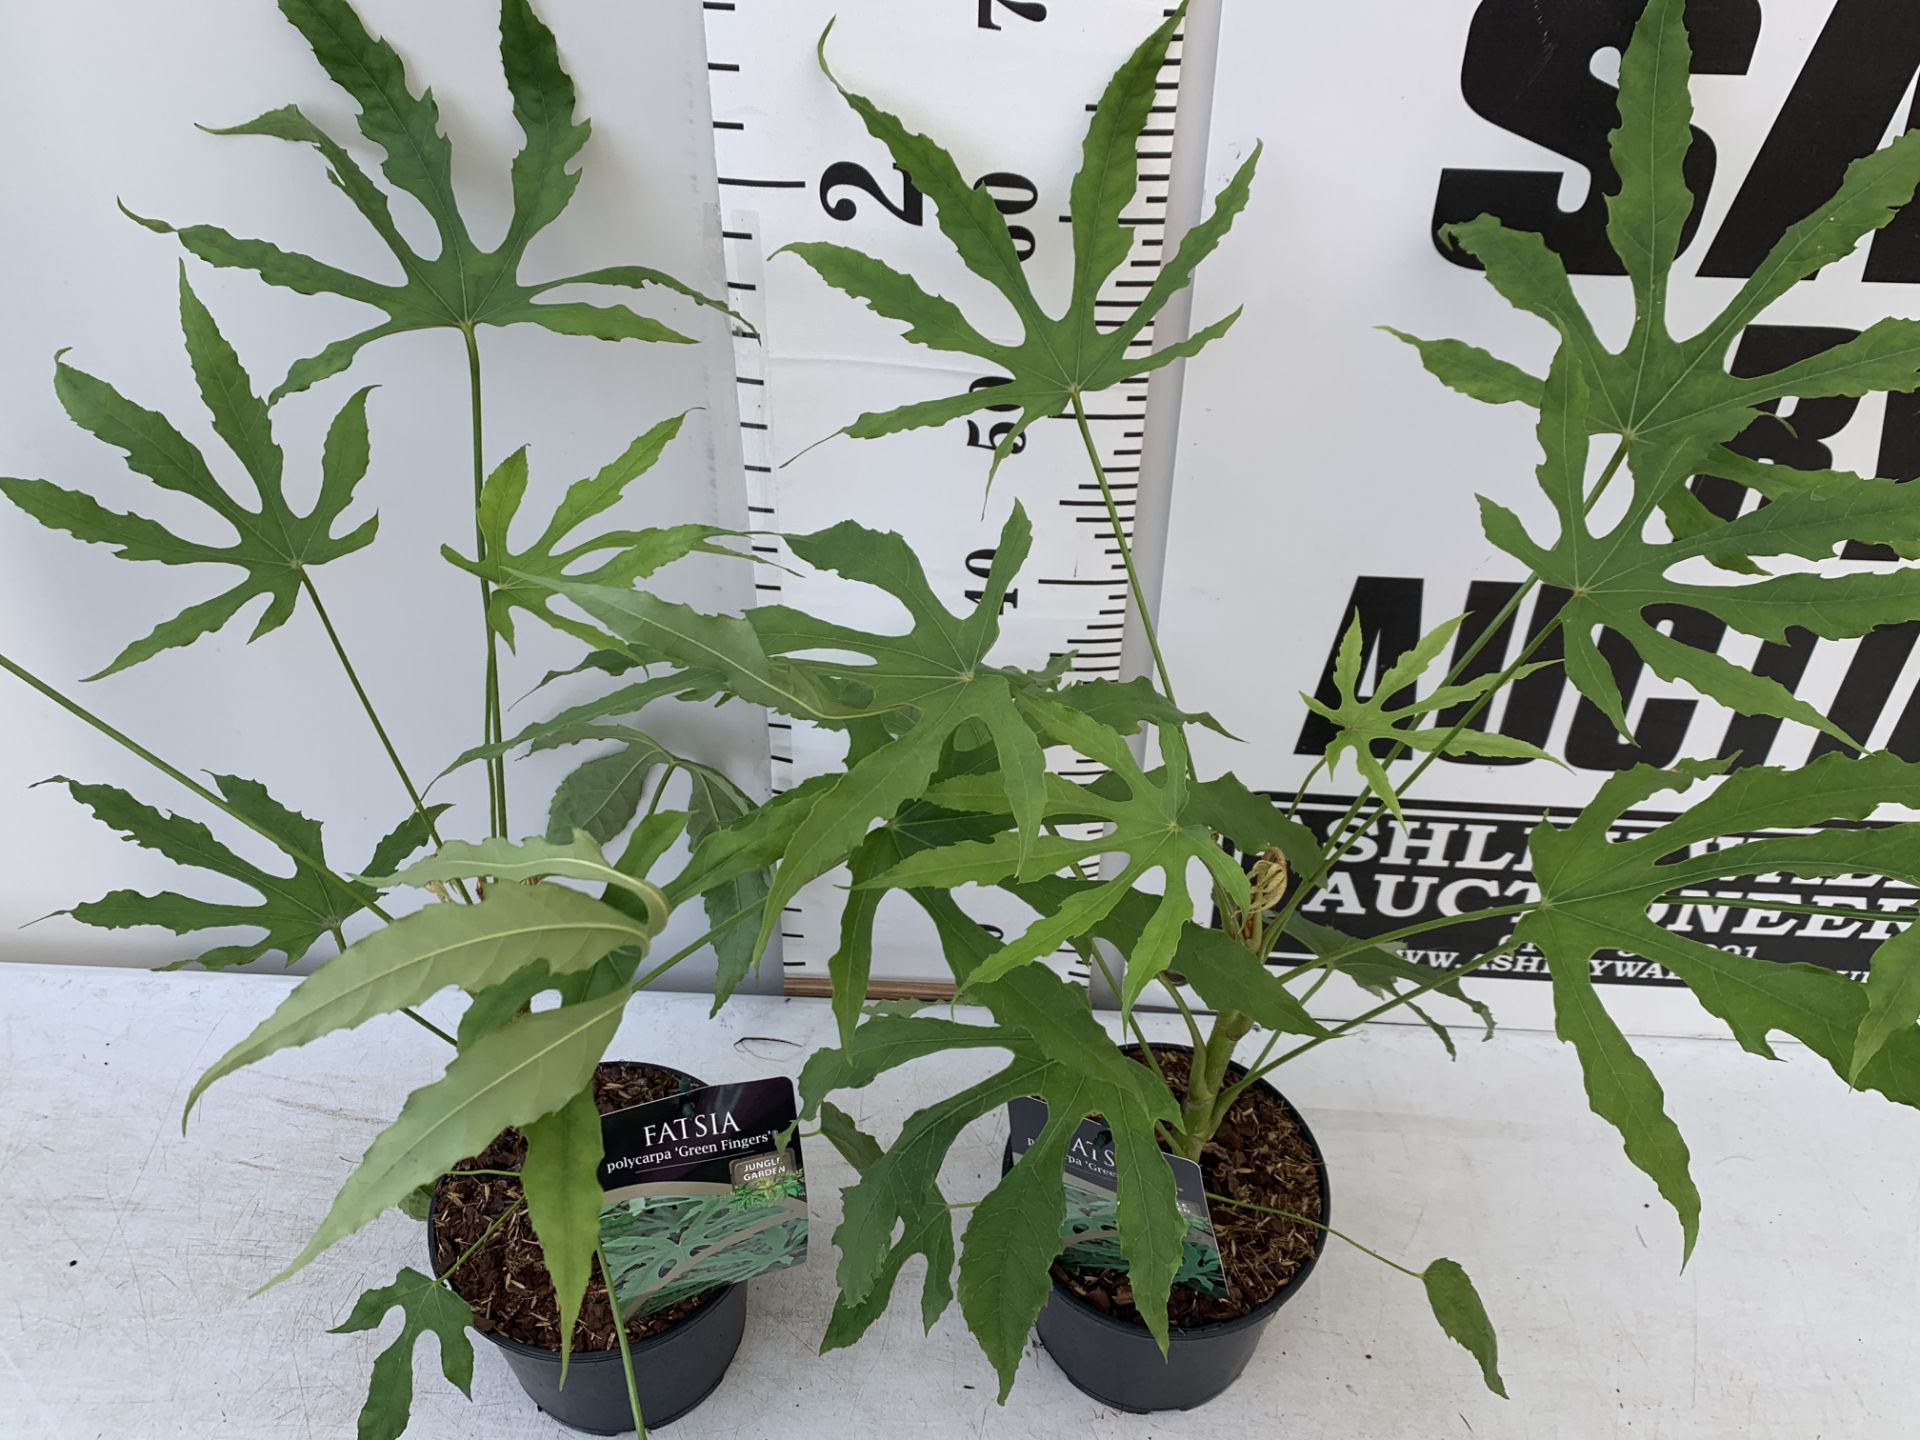 TWO FATSIA JUNGLE GARDEN POLYCARPA GREEN FINGERS IN 2 LTR POTS 70CM TALL PLUS VAT TO BE SOLD FOR THE - Bild 3 aus 8